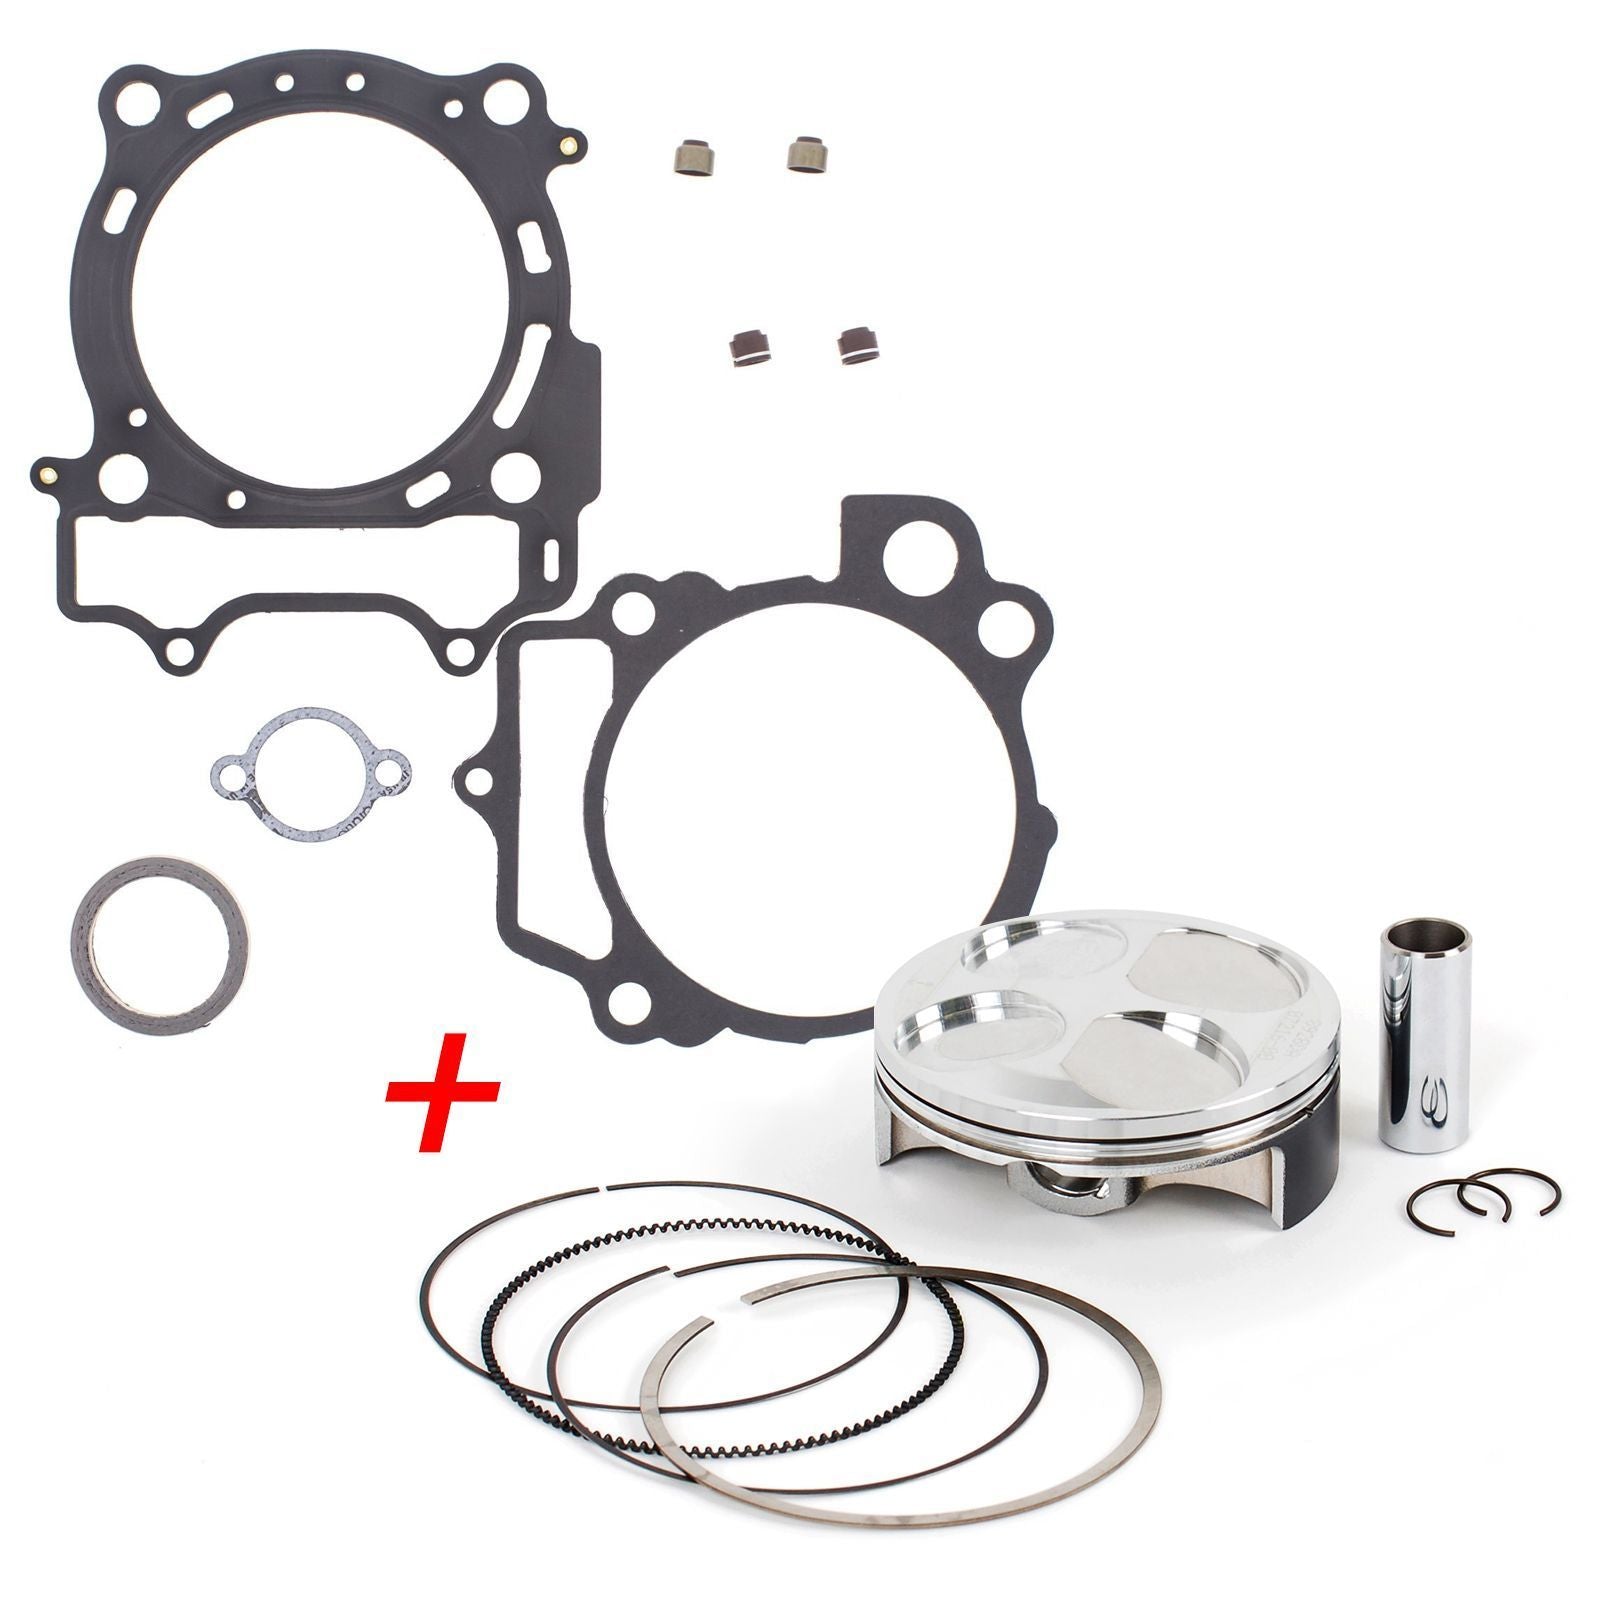 New Top End Rebuild Kit (B) For Yamaha WR450F 2007-2015 #ERTY034B